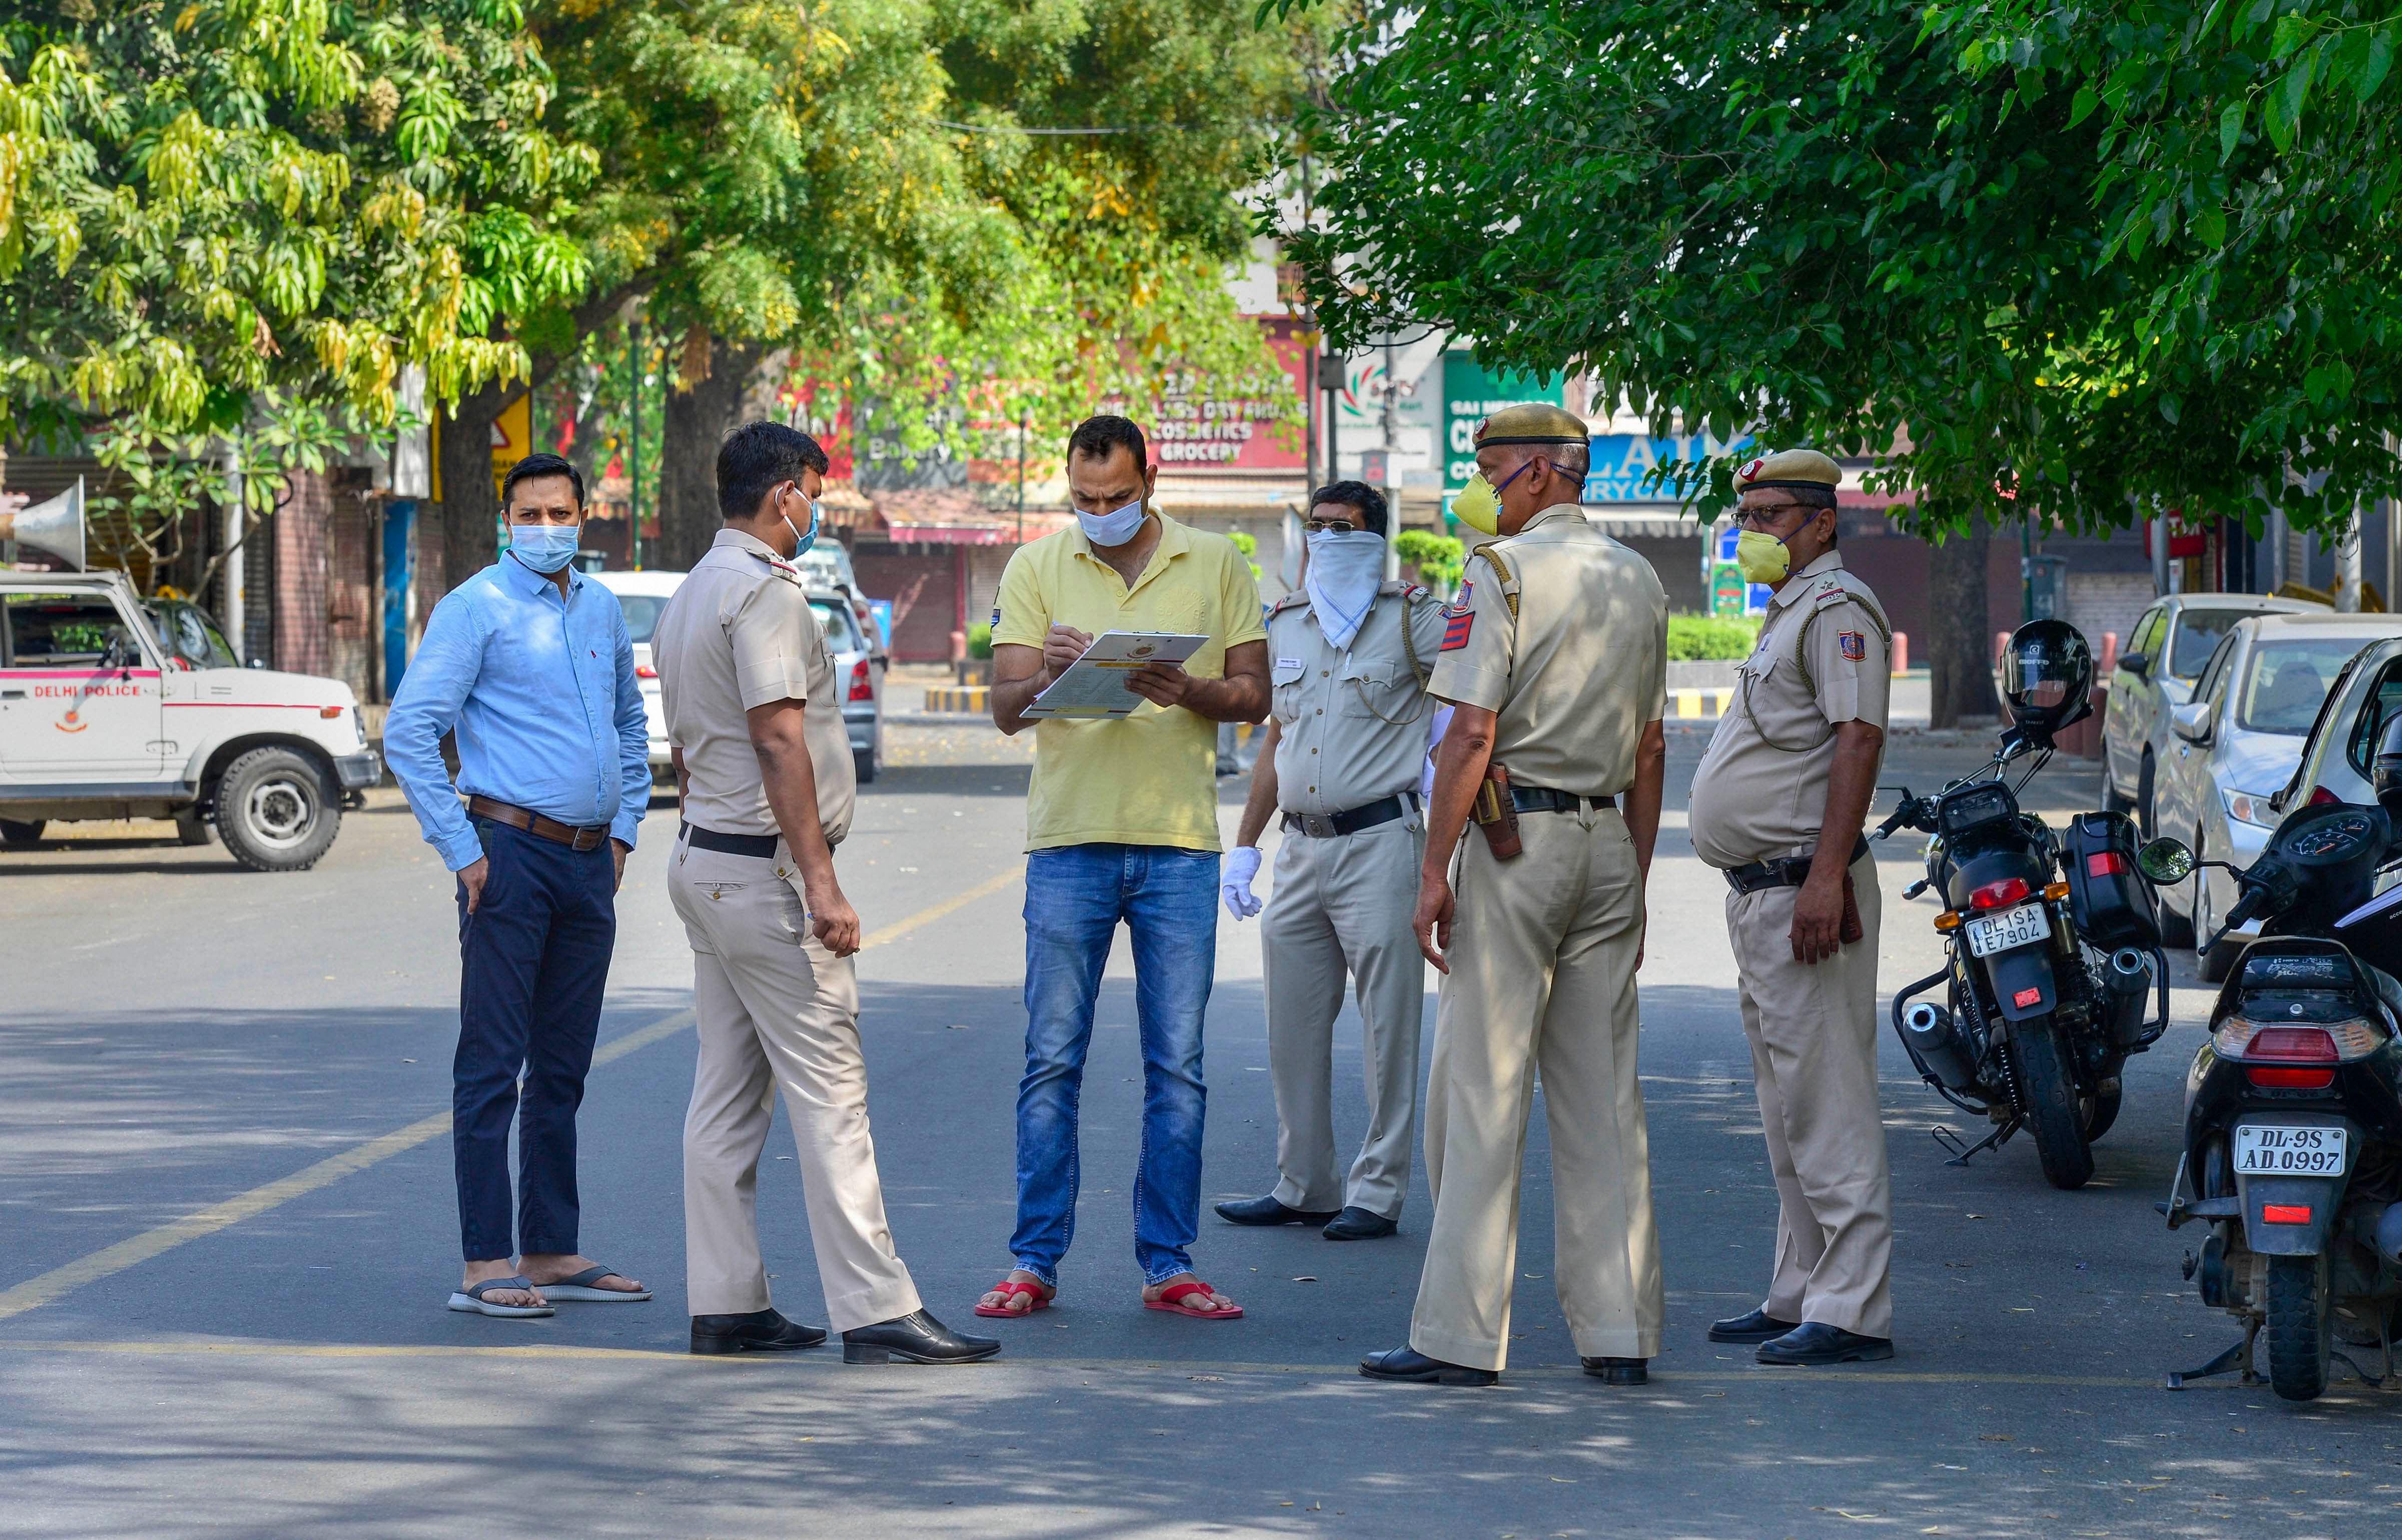 Police personnel stand guard in an area near Bengali market,which has been identified as a containment zone, during the nationwide lockdown to curb the spread of coronavirus, in New Delhi. (PTI Photo)